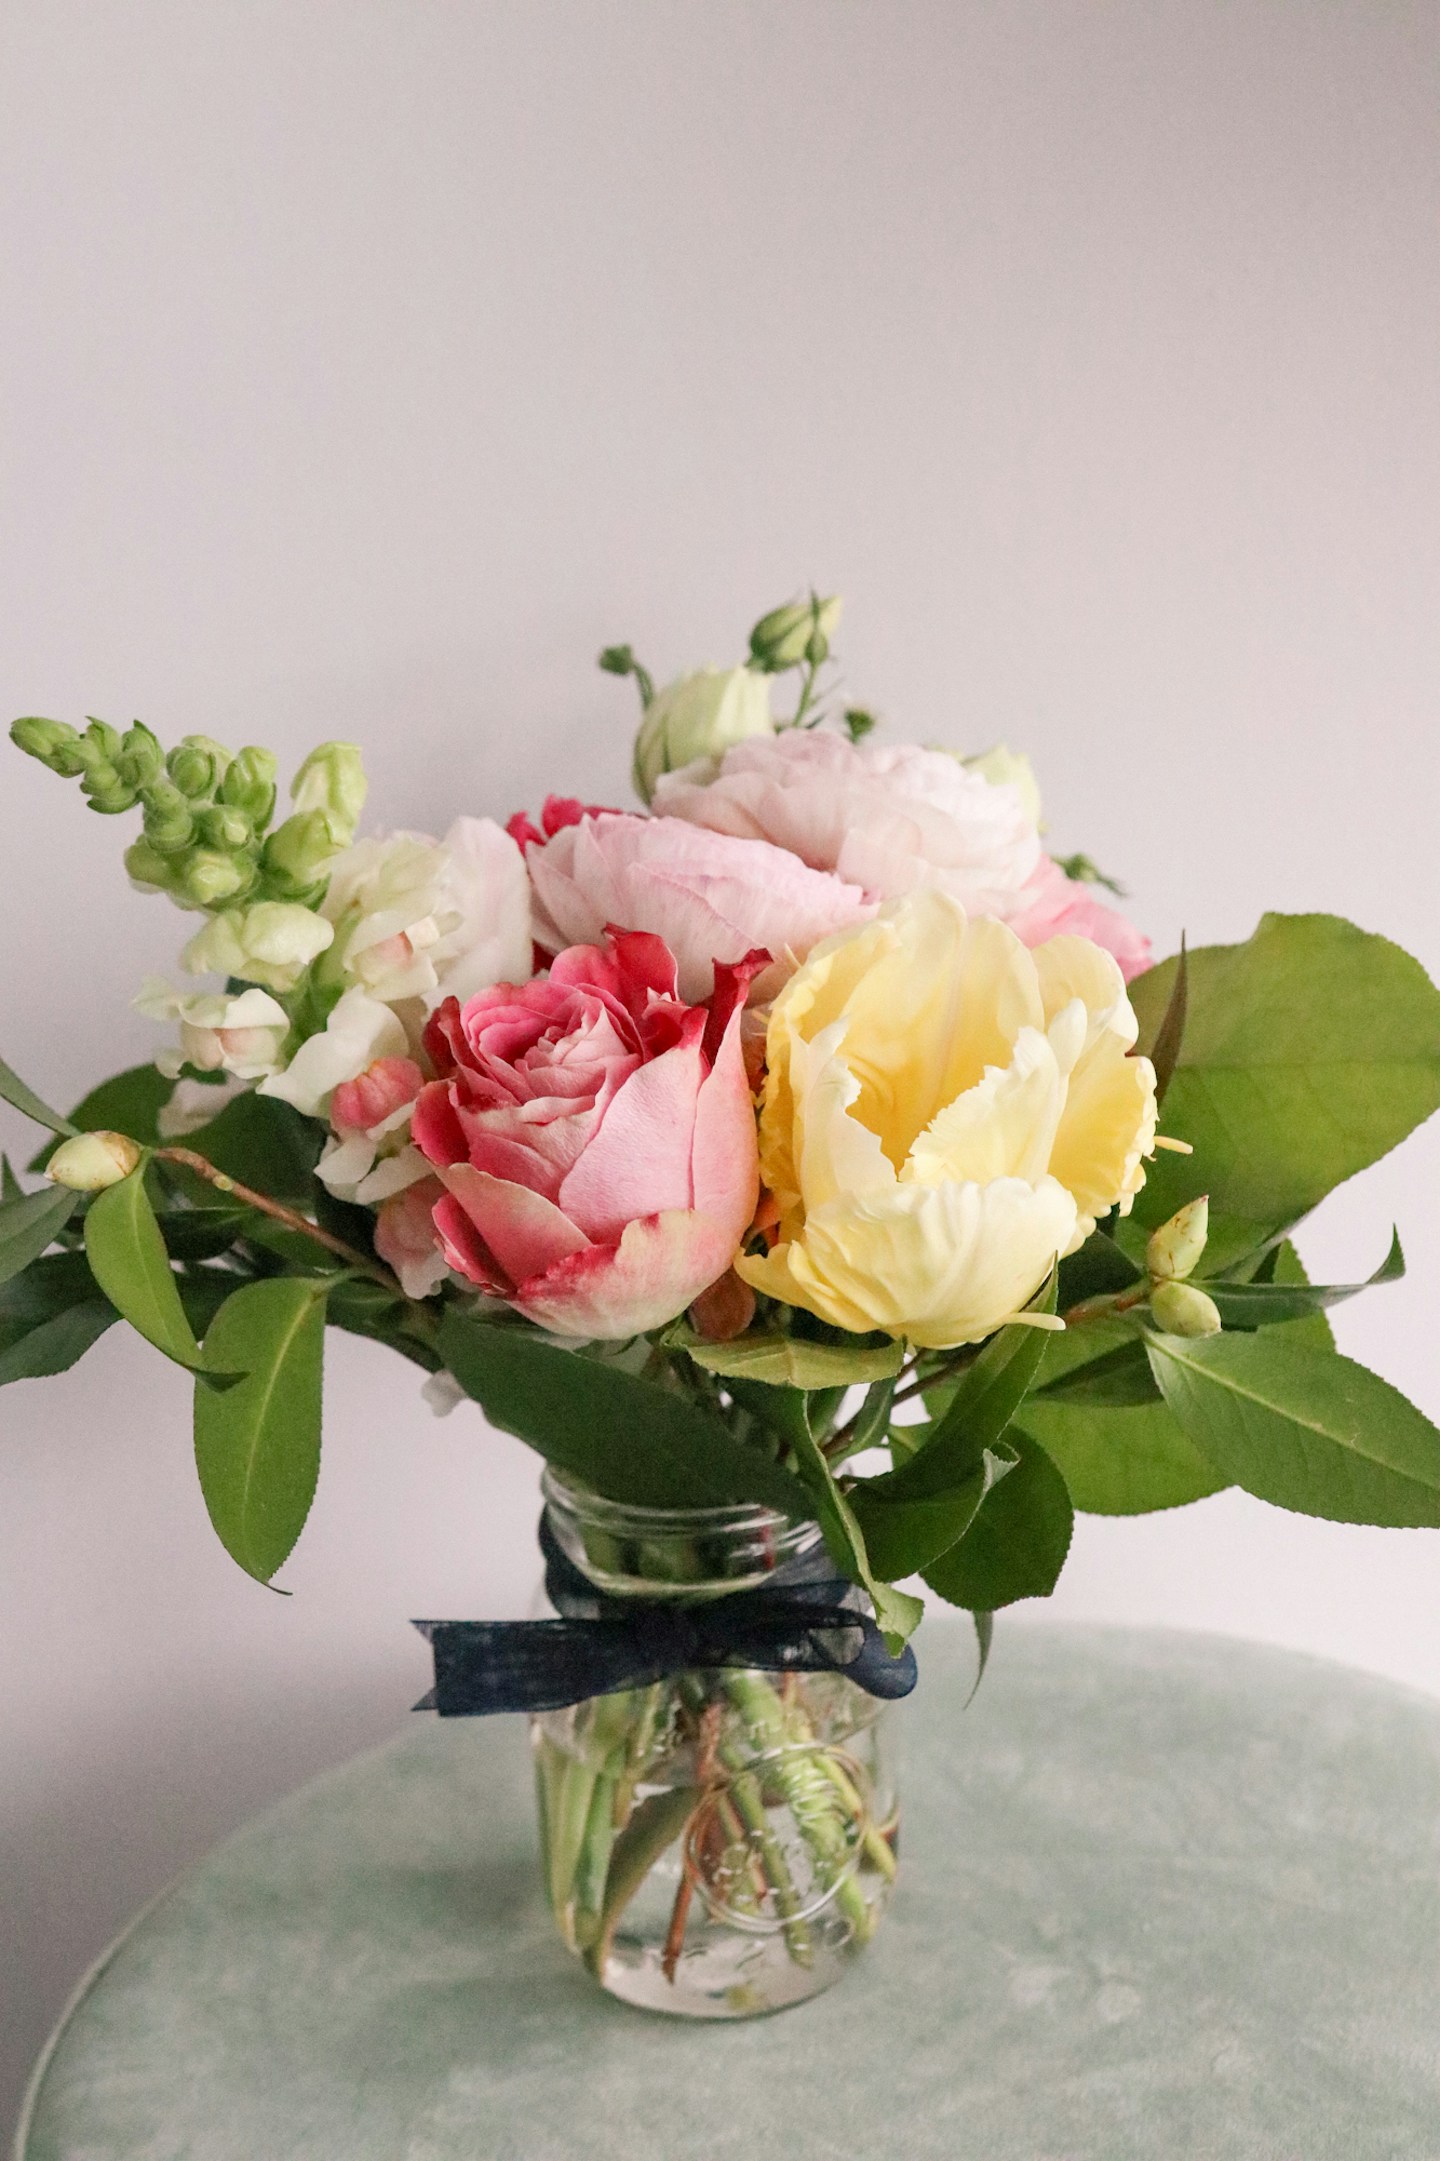 Mother's Day Gift Ideas: get her a floral subscription from a local florist. In Toronto, I love Brave Blooms which offer 3, 6 and 12 month subscriptions 1x or 2x per month!